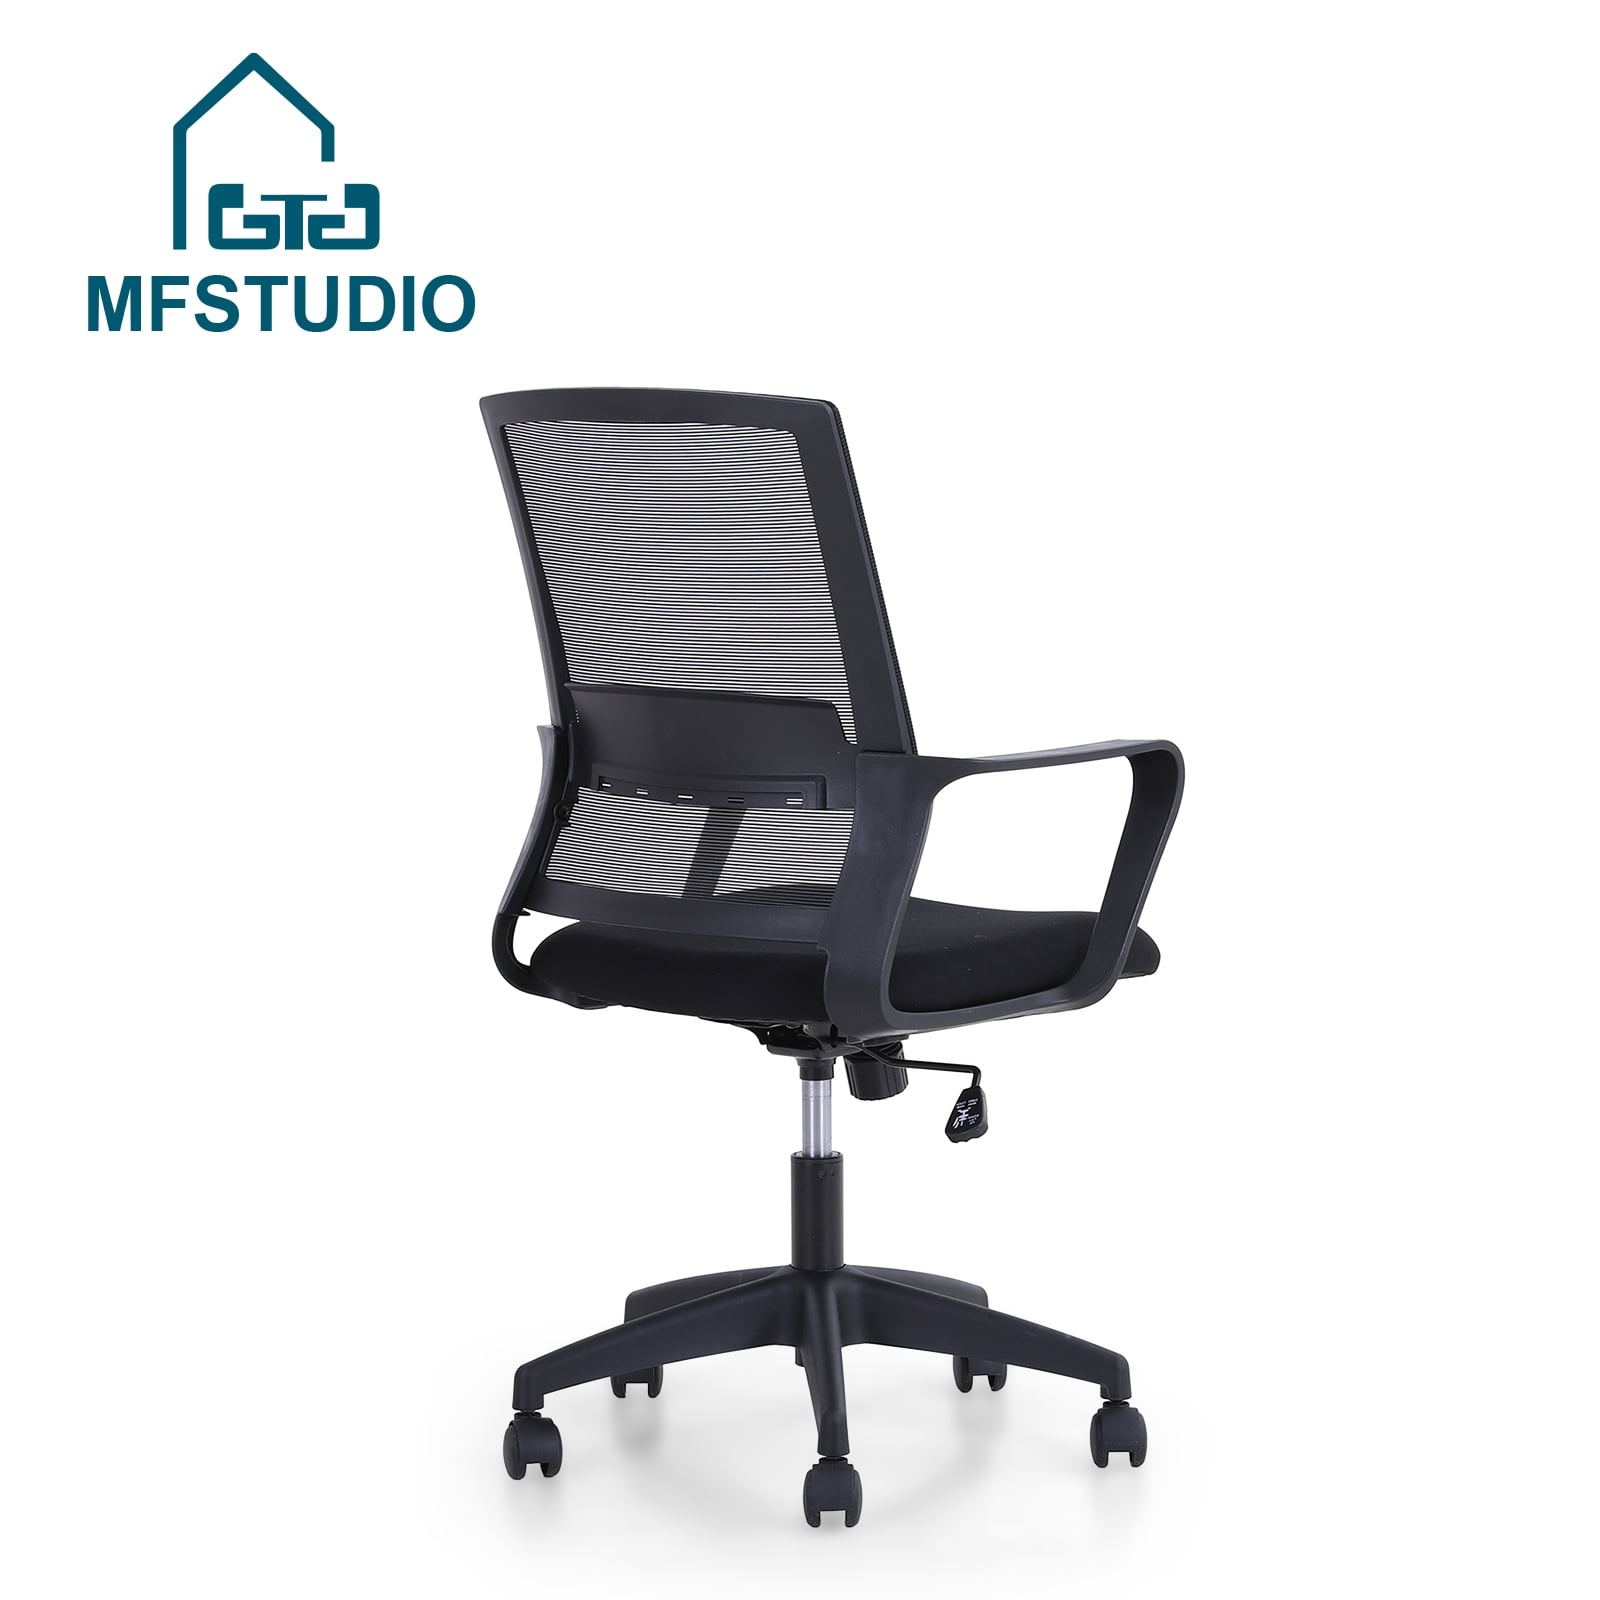 MF Studio Office Chair Ergonomic Office Desk Chair Home High Back with Lumbar Support Executive Computer Chair with Adjustable Armrest & Seat Cushion